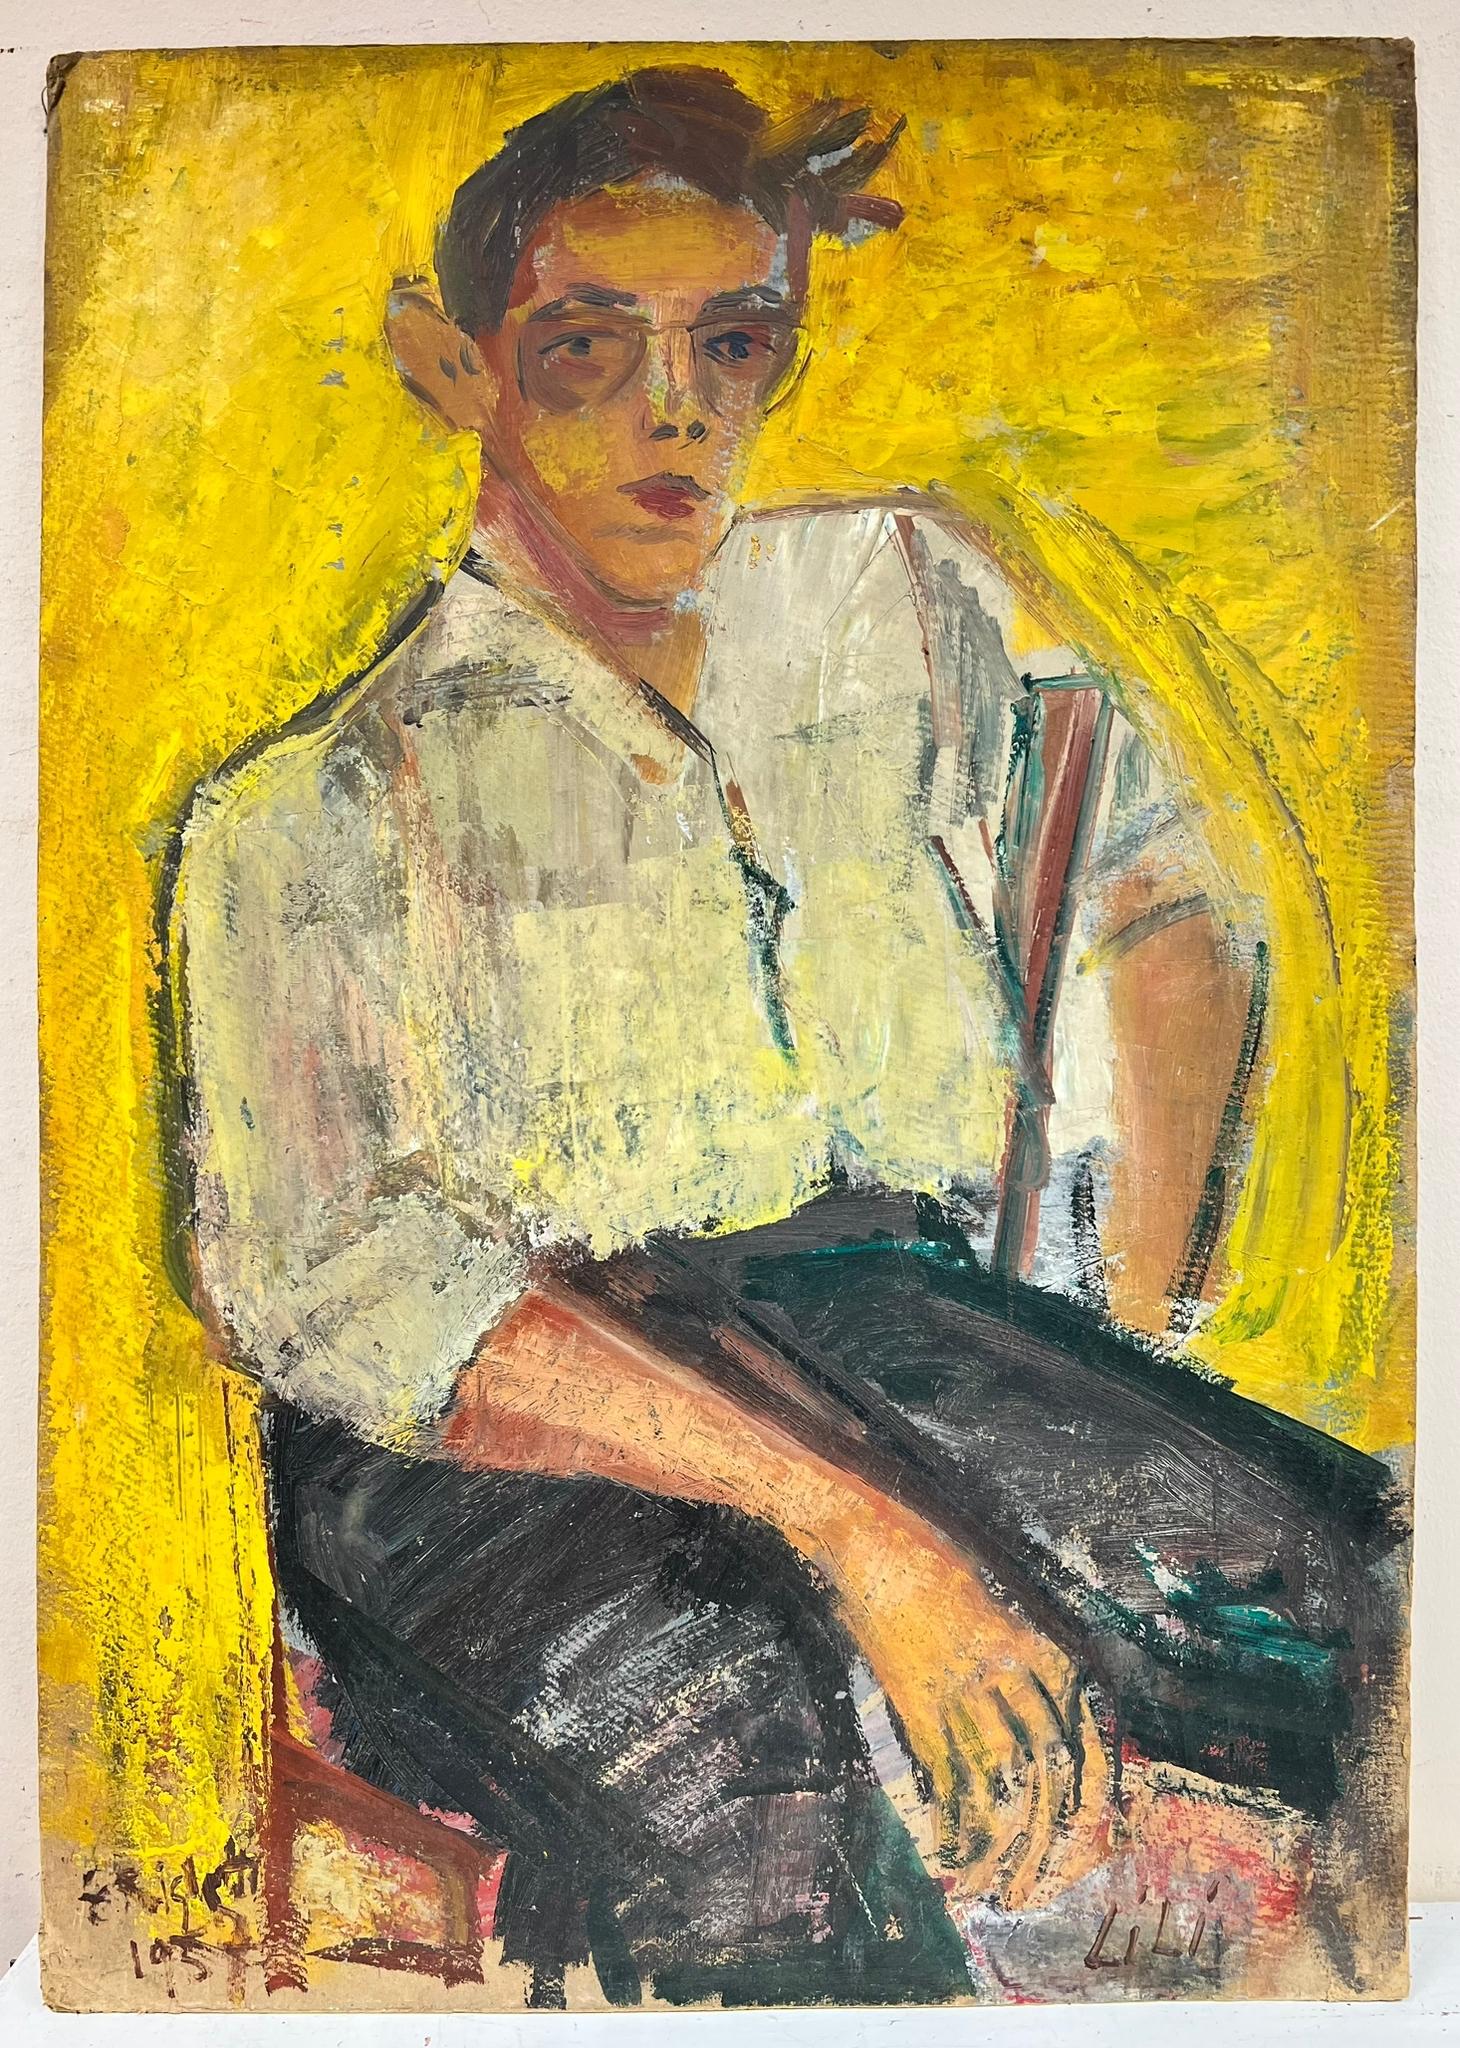 20th Century French Signed Oil Retro Yellow Portrait of A Male with Glasses - Painting by Édouard Righetti (1924-2001)